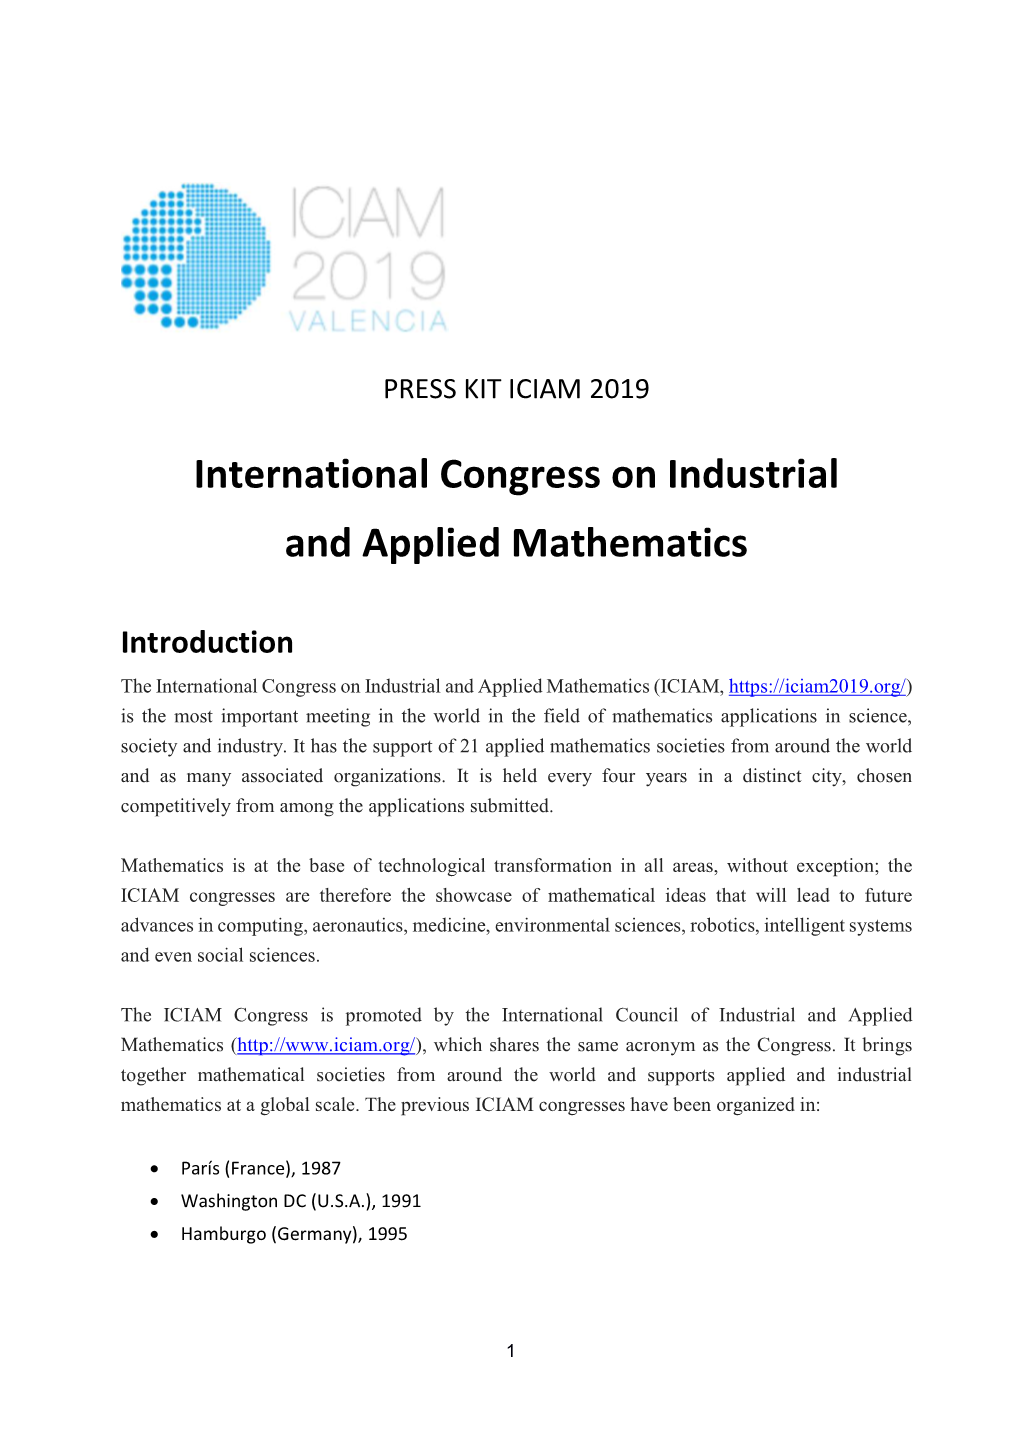 International Congress on Industrial and Applied Mathematics